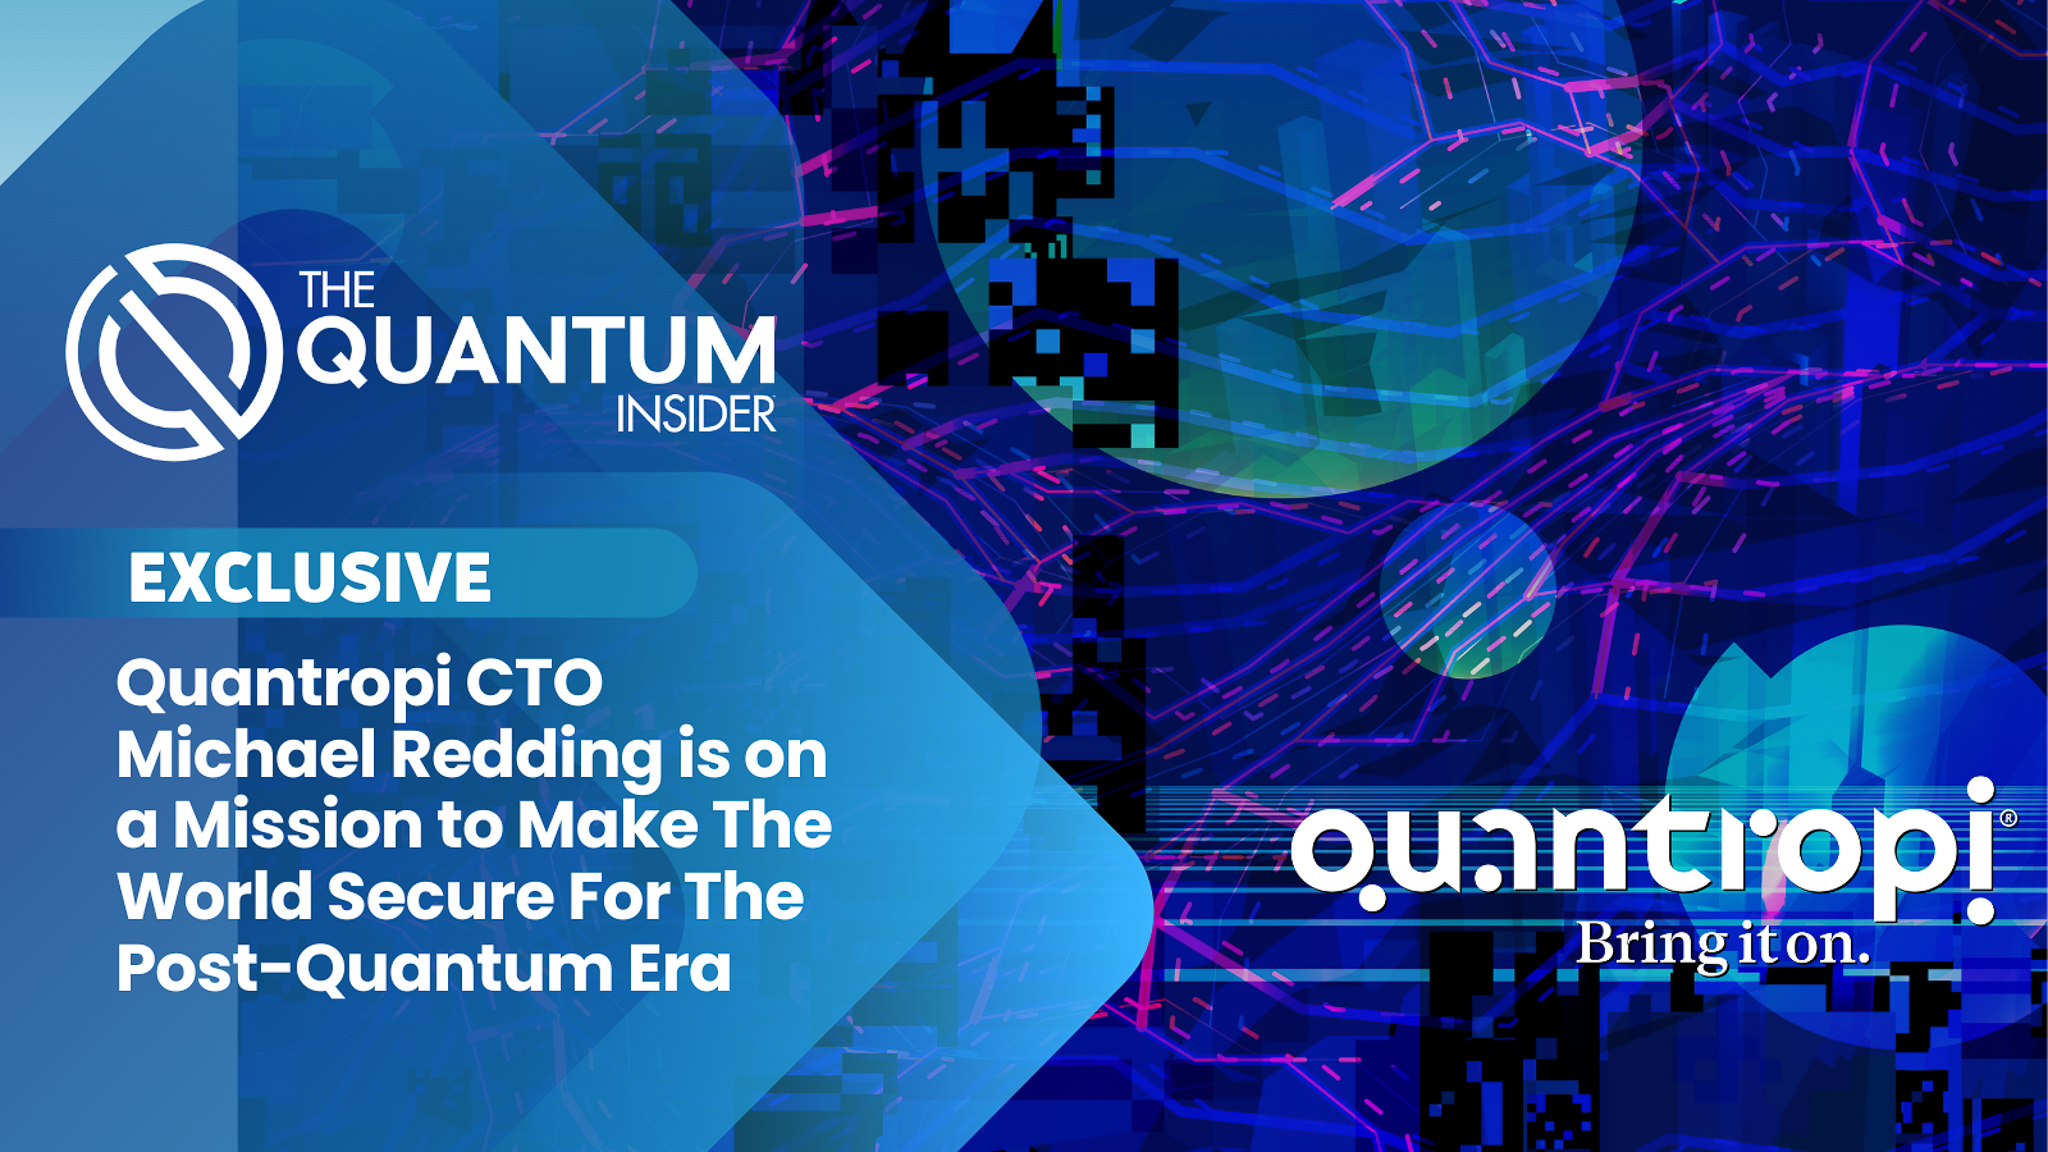 Quantropi CTO Michael Redding is on a Mission to Make The World Safe For The Post-Quantum Era